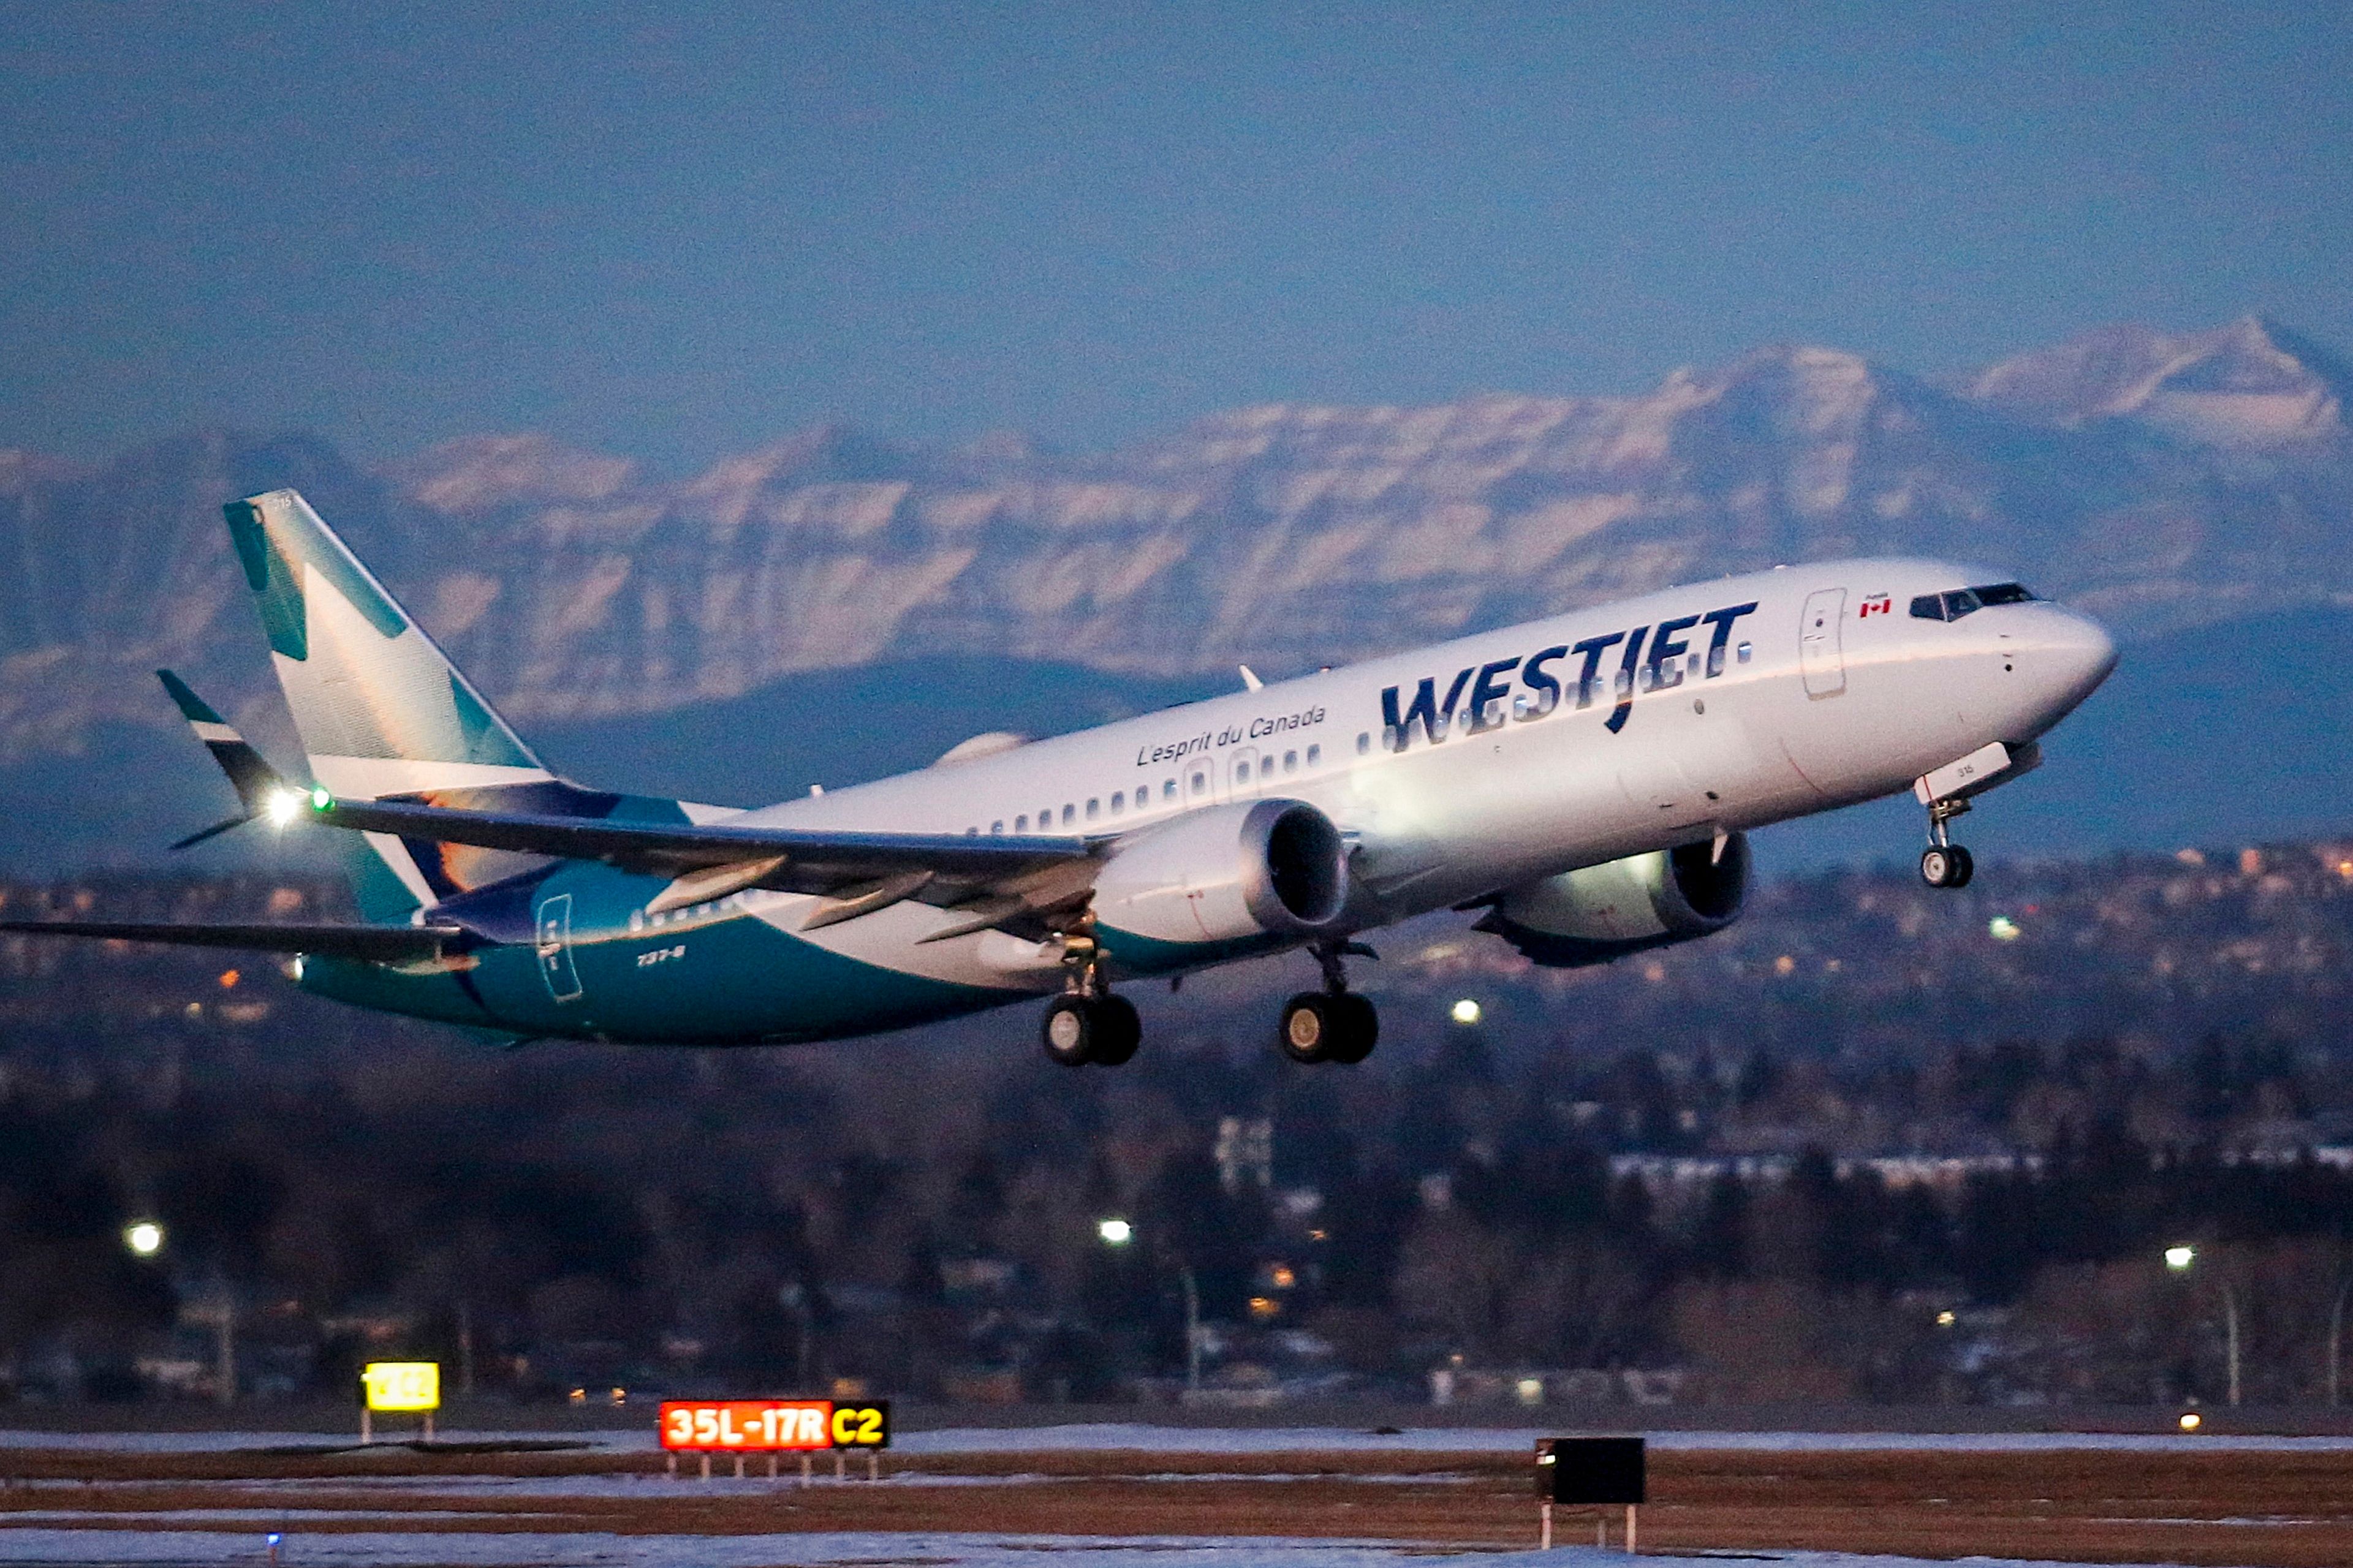 FILE - A westJet airplane takes off in Calgary, Alta., Jan. 21, 202. Mechanics at the Canadian airline WestJet say they are dropping plans to begin a strike now that the airline has agreed to resume negotiations on a new collective-bargaining agreement. Members of the Aircraft Mechanics Fraternal Association had been preparing to walk off the job on Thursday night. (Jeff McIntosh/The Canadian Press via AP, File)